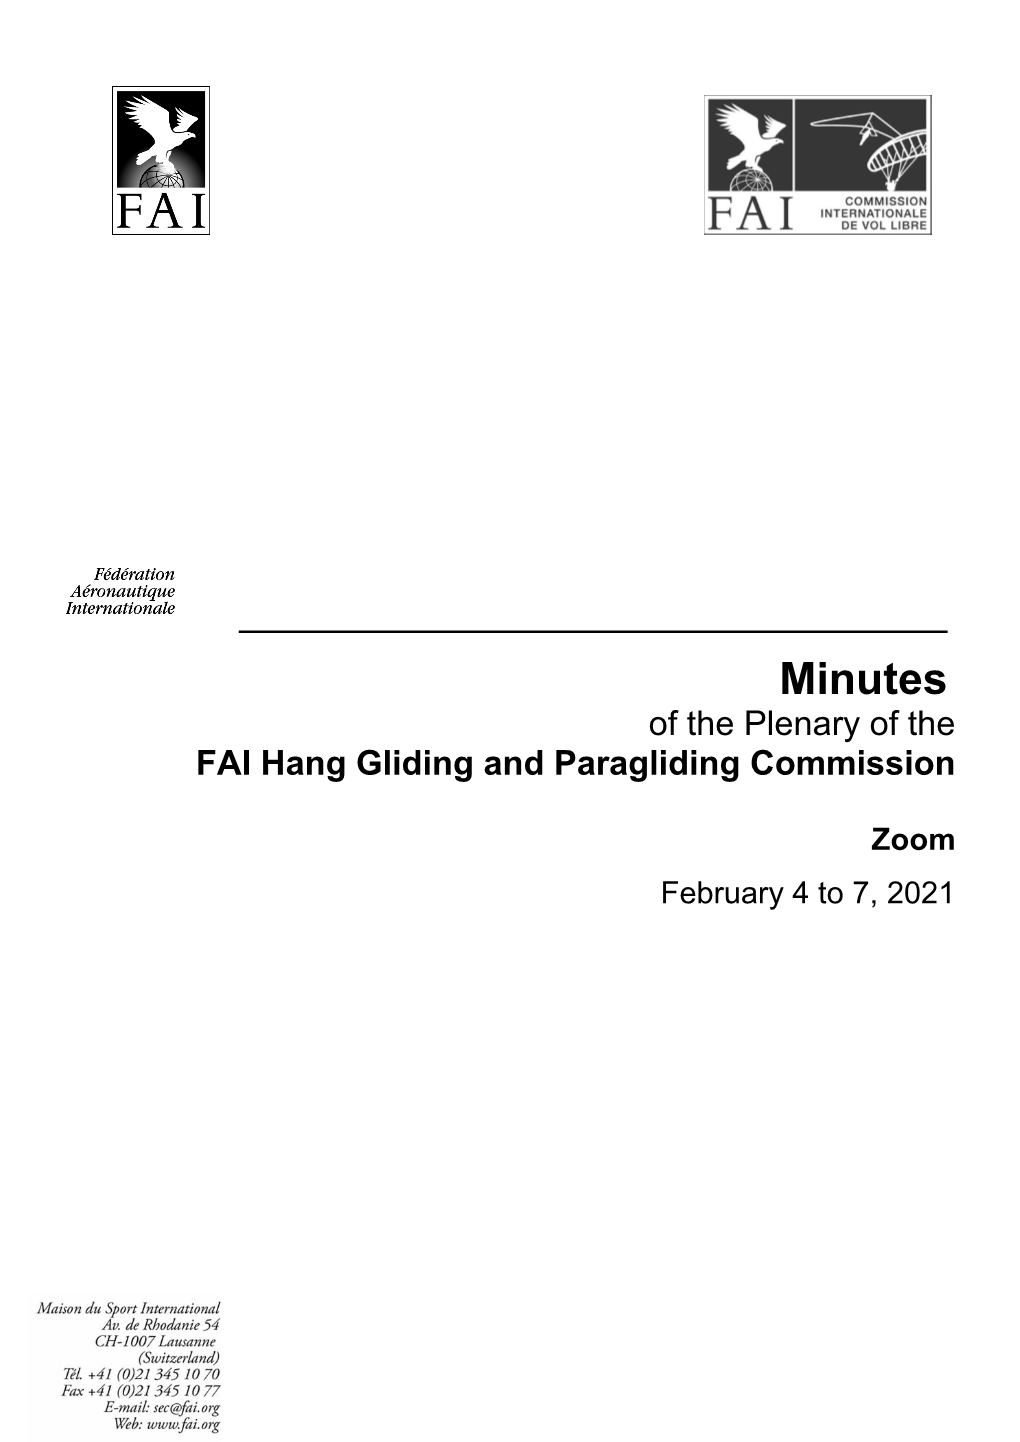 Minutes of the Plenary of the FAI Hang Gliding and Paragliding Commission